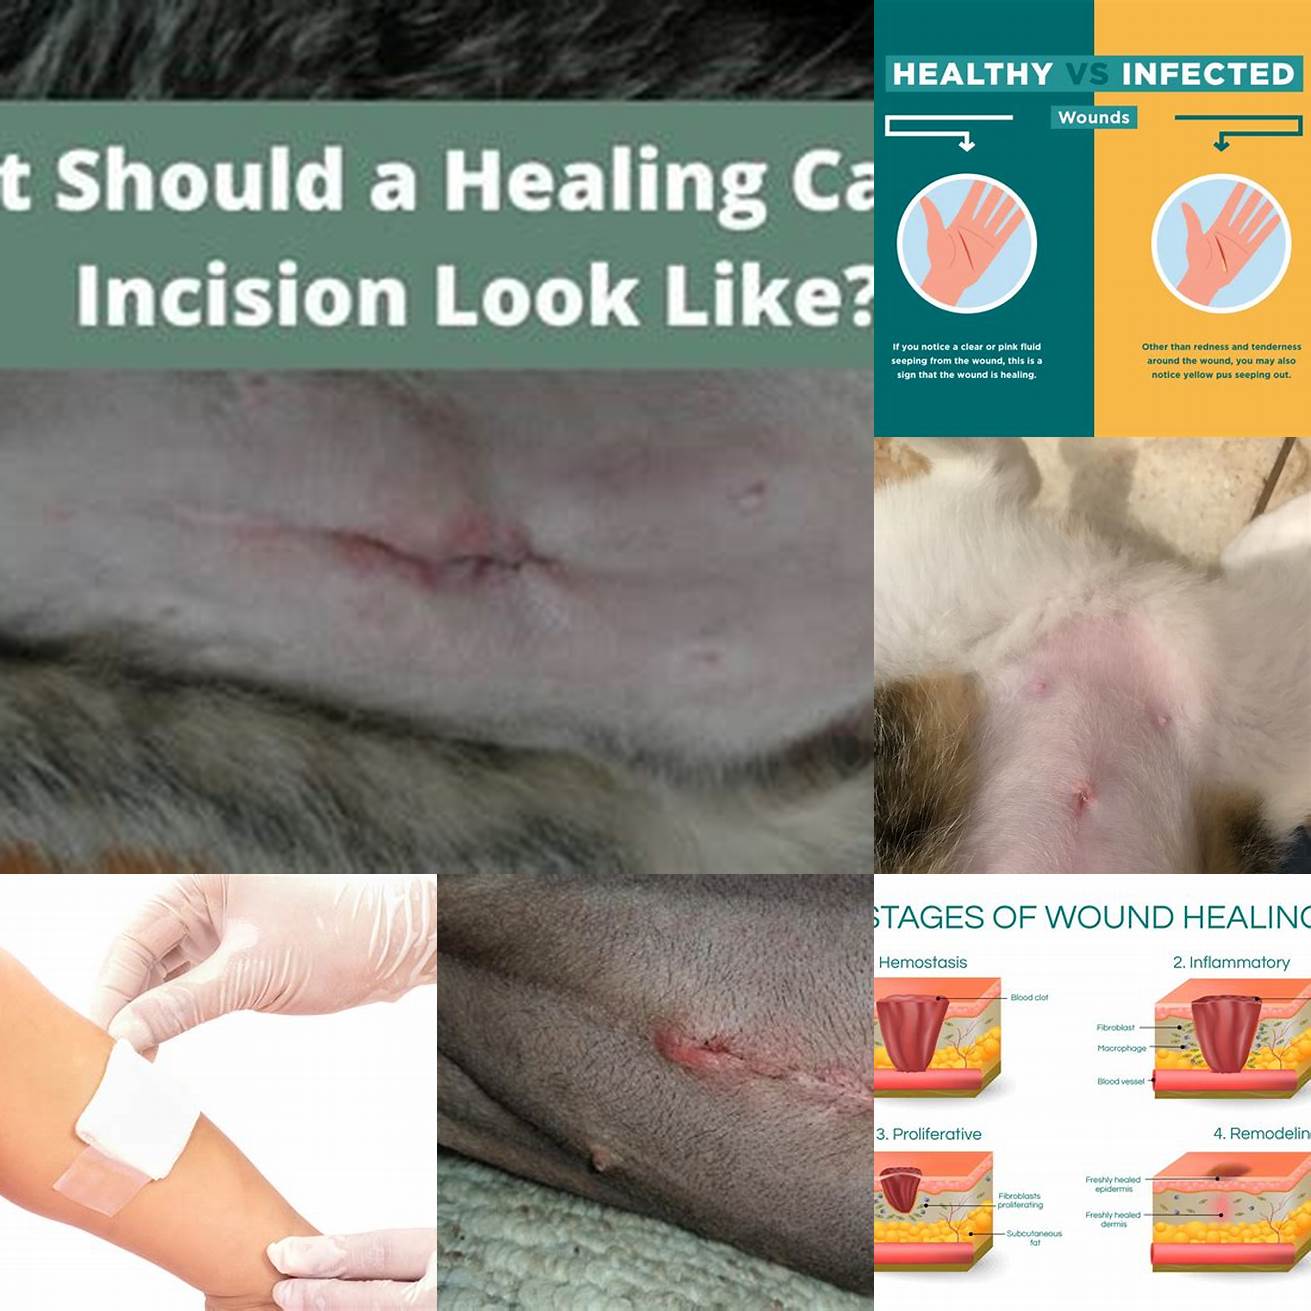 Monitor the Healing - Keep an eye on the wound and make sure it is healing properly If there are signs of infection take your cat to the vet immediately